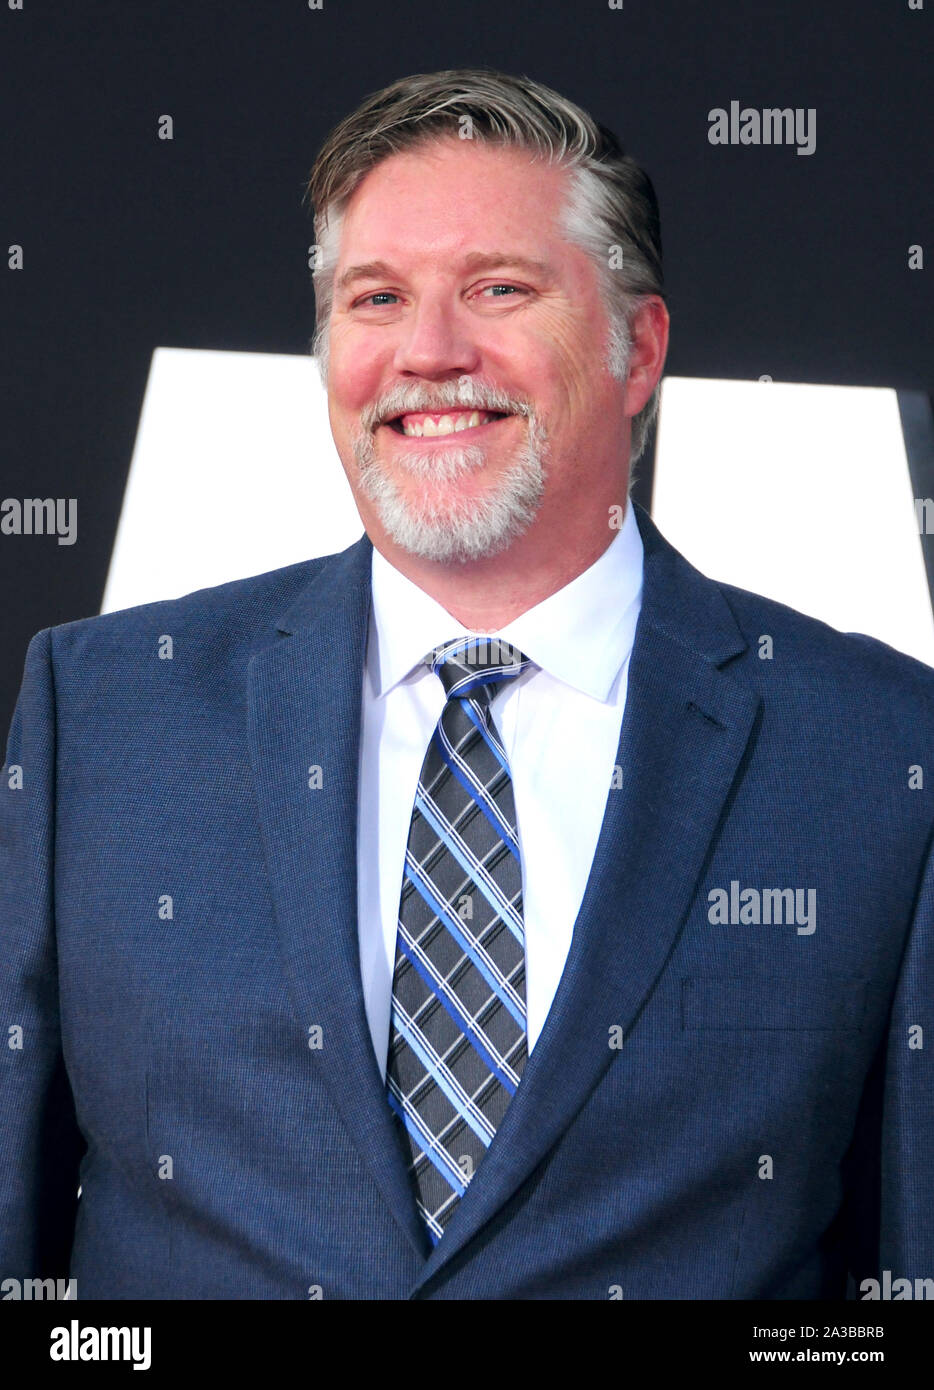 Hollywood, California, USA 6th October 2019 VFX Supervisor Bill Westenhofer attends Paramount Pictures Presents The Premiere of 'Gemini Man' on October 6, 2019 at TCL Chinese Theatre in Hollywood, California, USA. Photo by Barry King/Alamy Live News Stock Photo